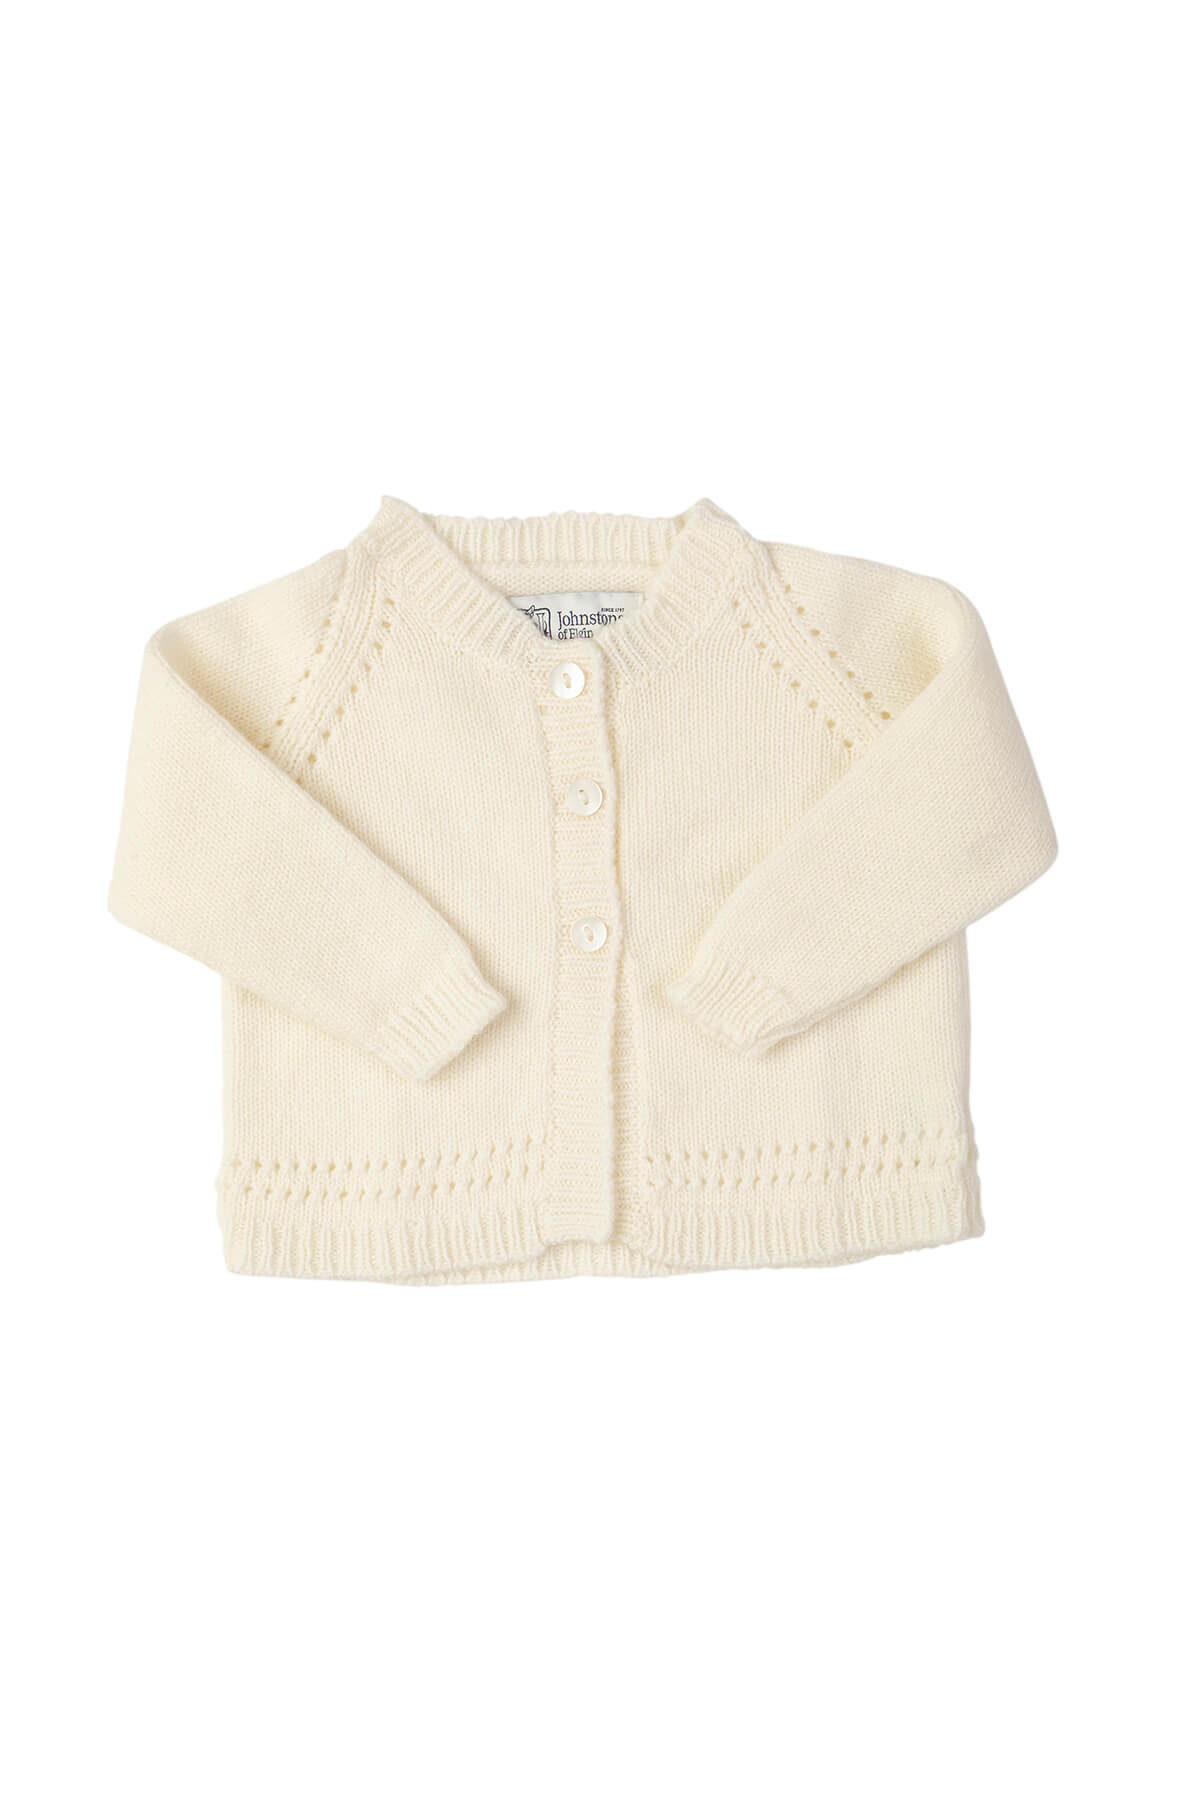 Johnstons of Elgin’s Baby's 1st Cashmere Cardigan in Ecru on a beige background AW21GIFTSET19A